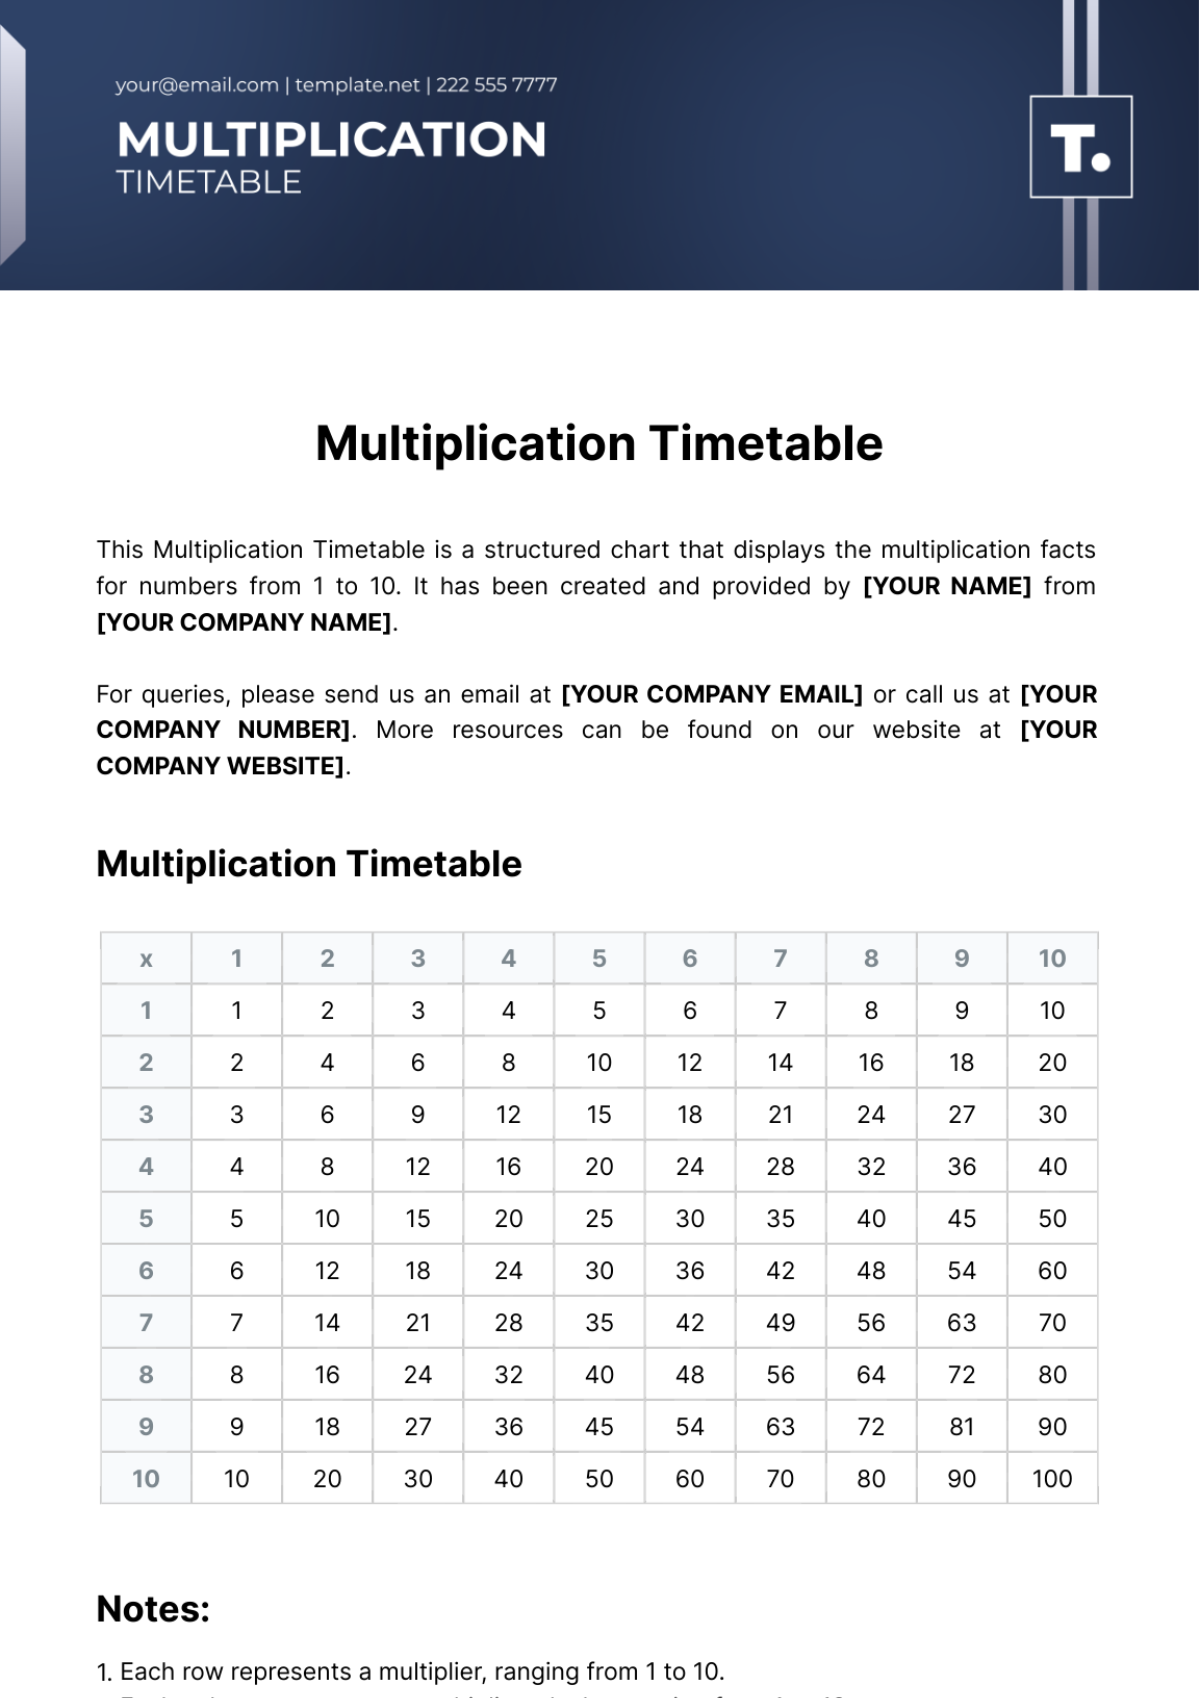 Multiplication Timetable Template